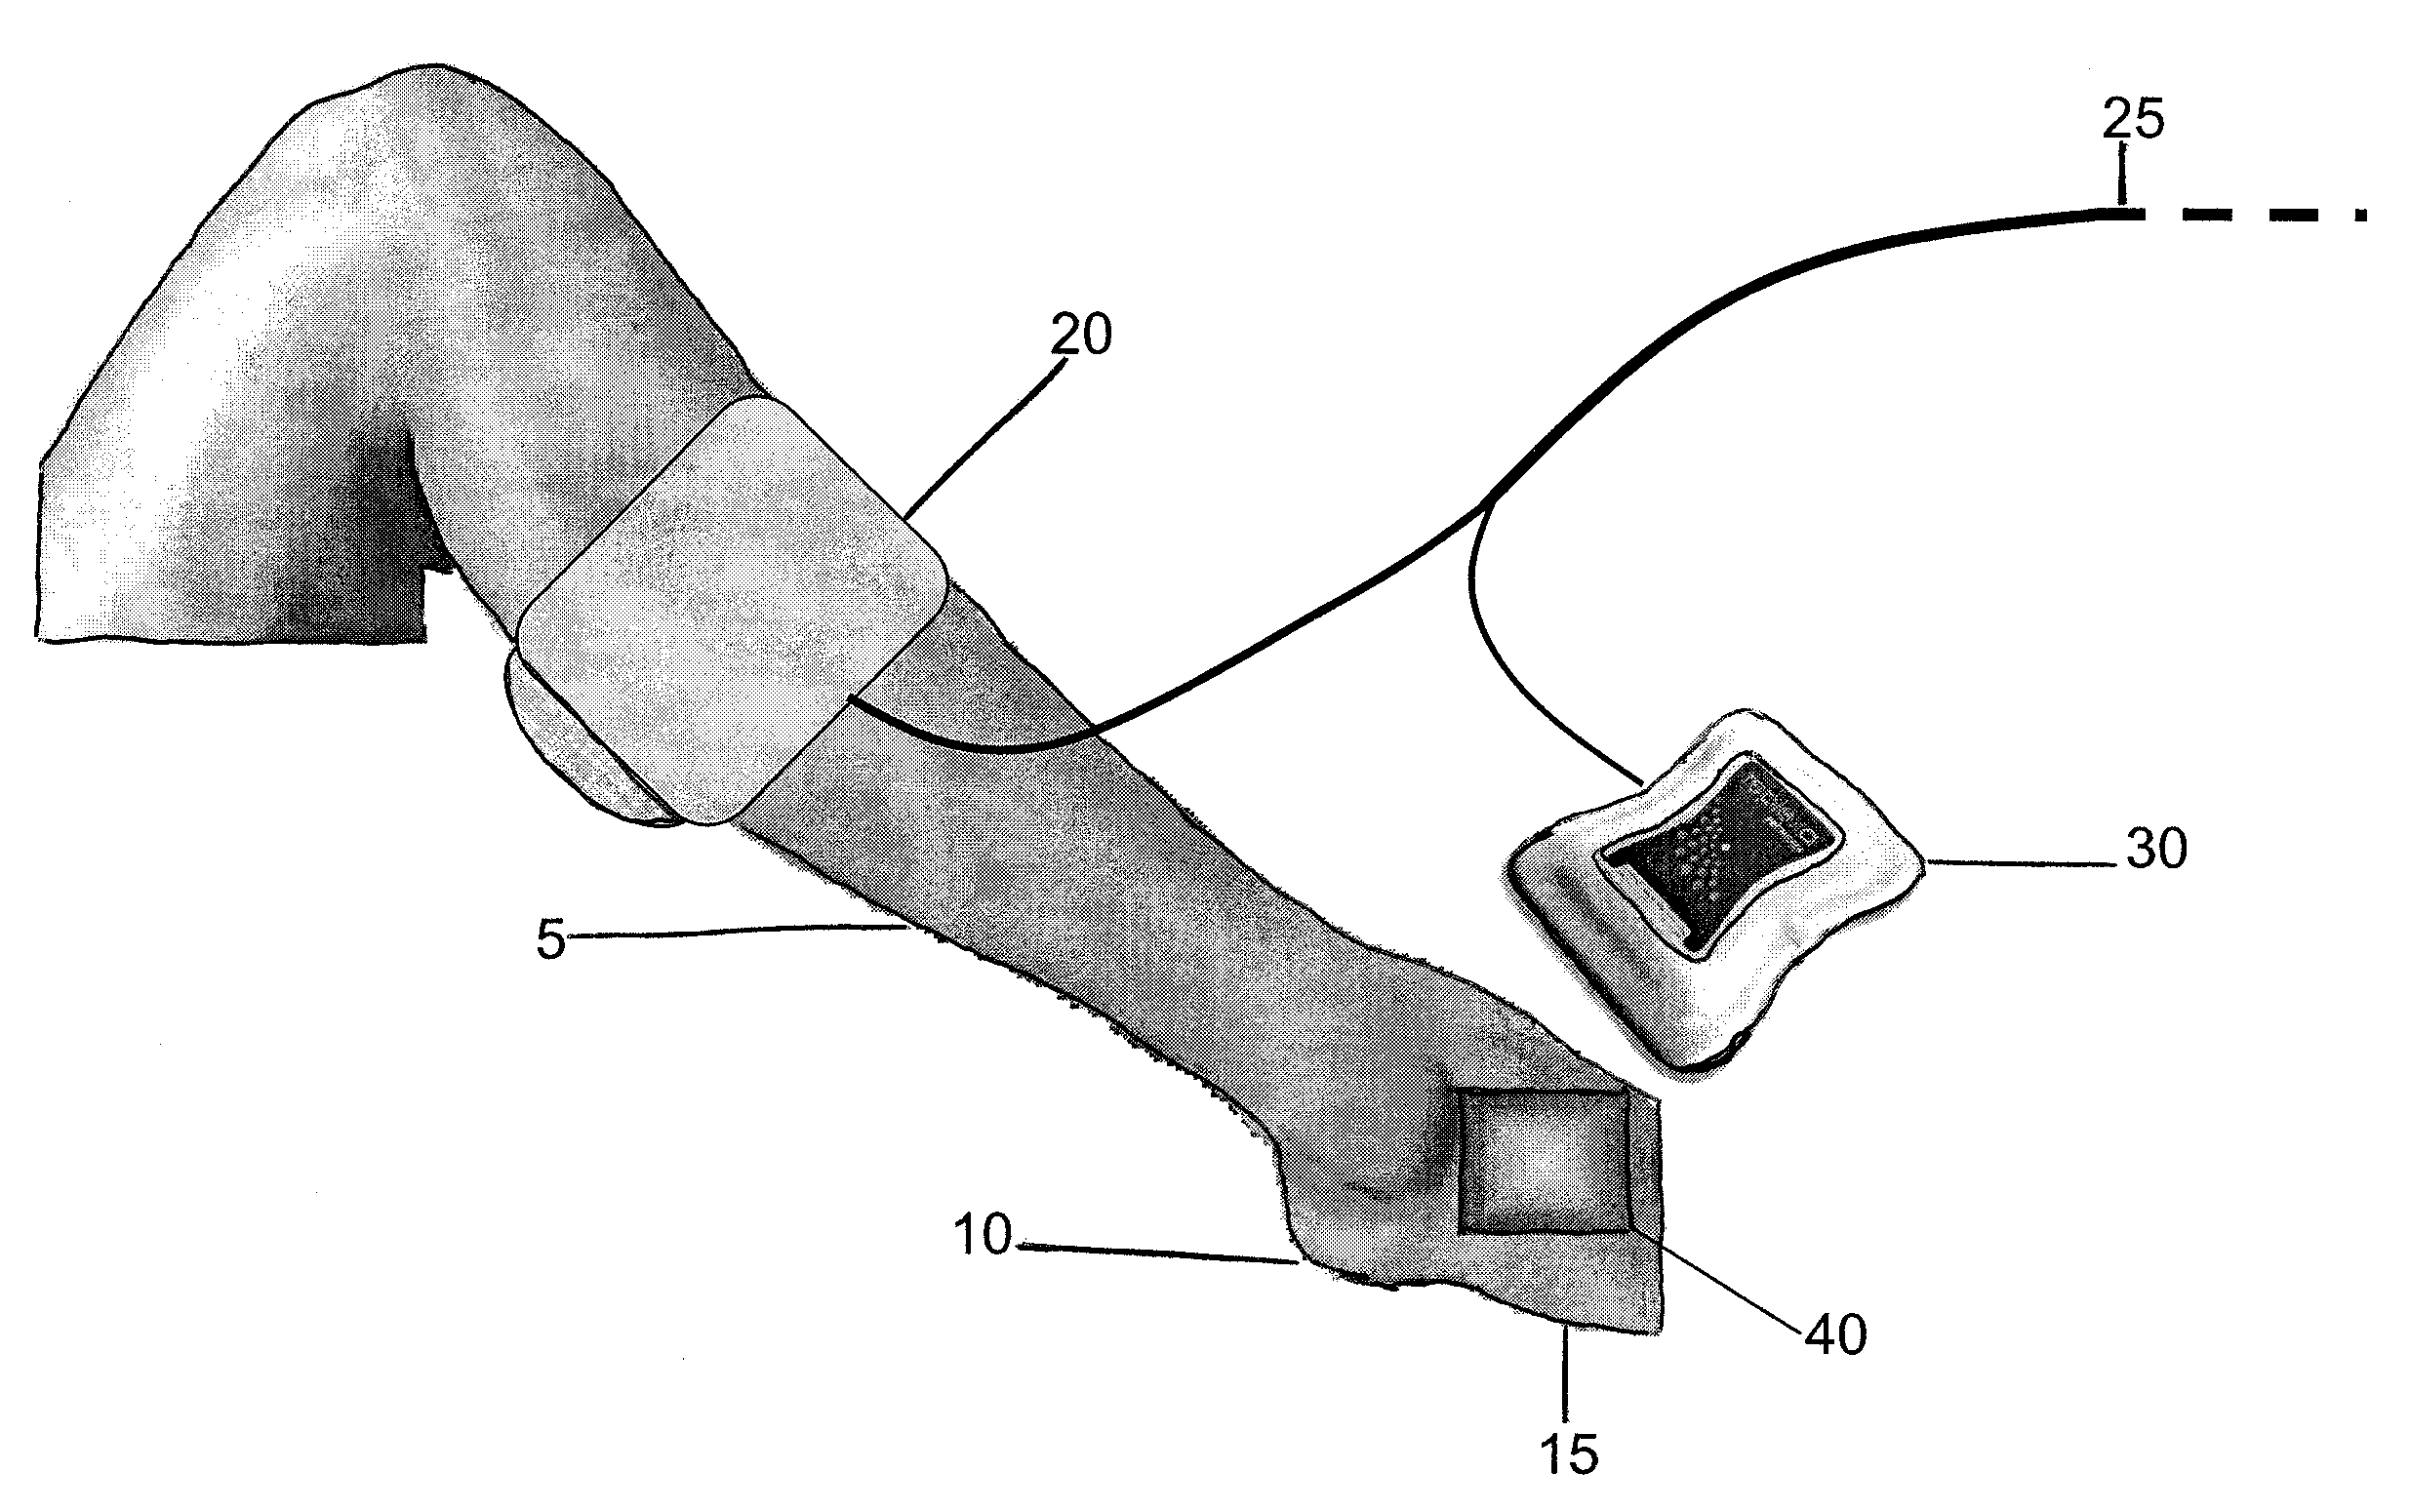 Method of treating a severe diabetic ulcer